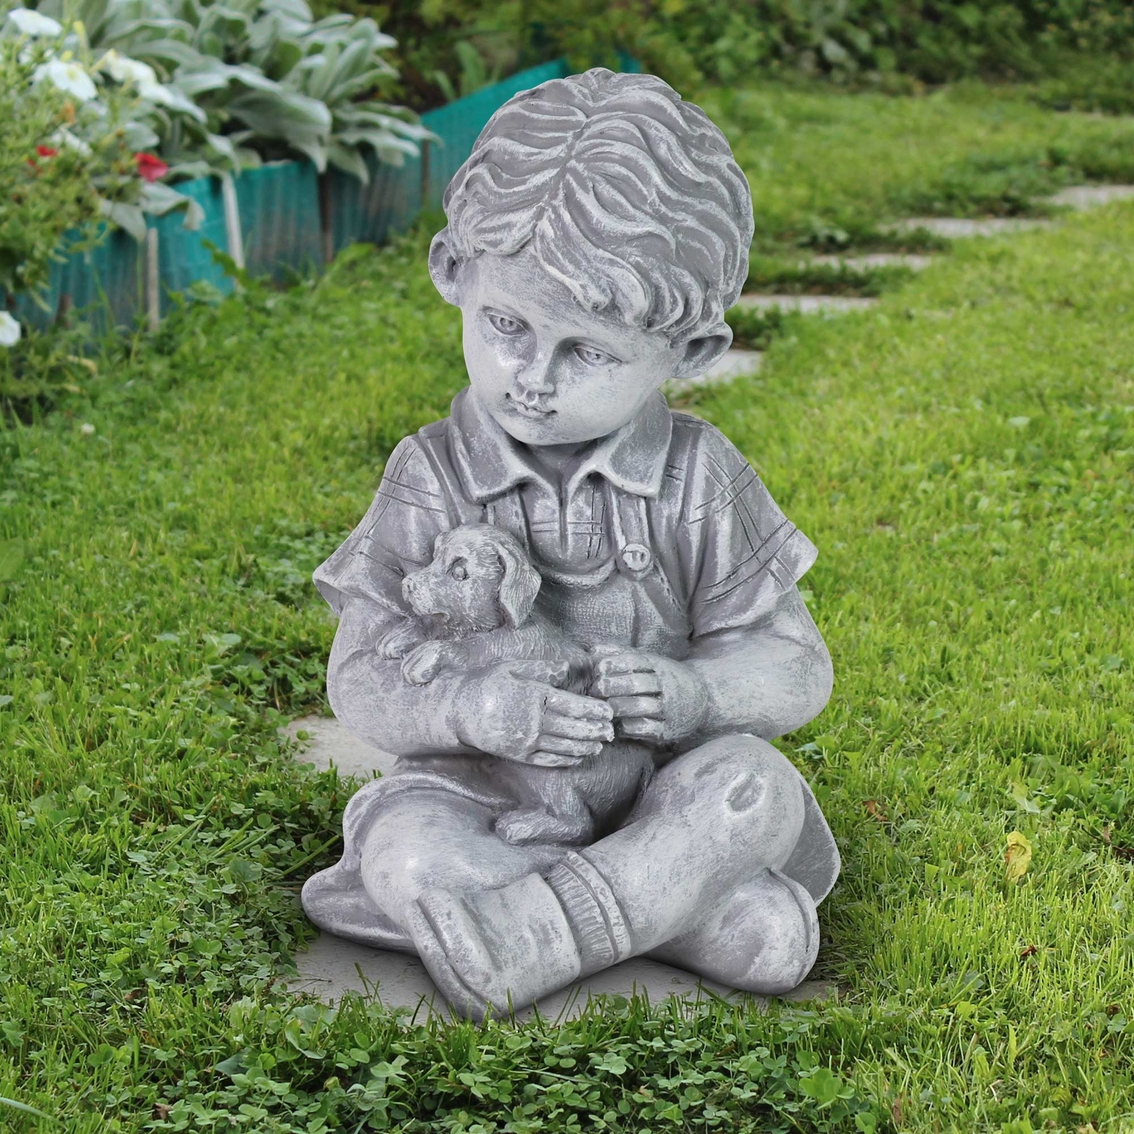 Exhart Young Boy with Puppy Resin Garden Statue - Image 2 of 2